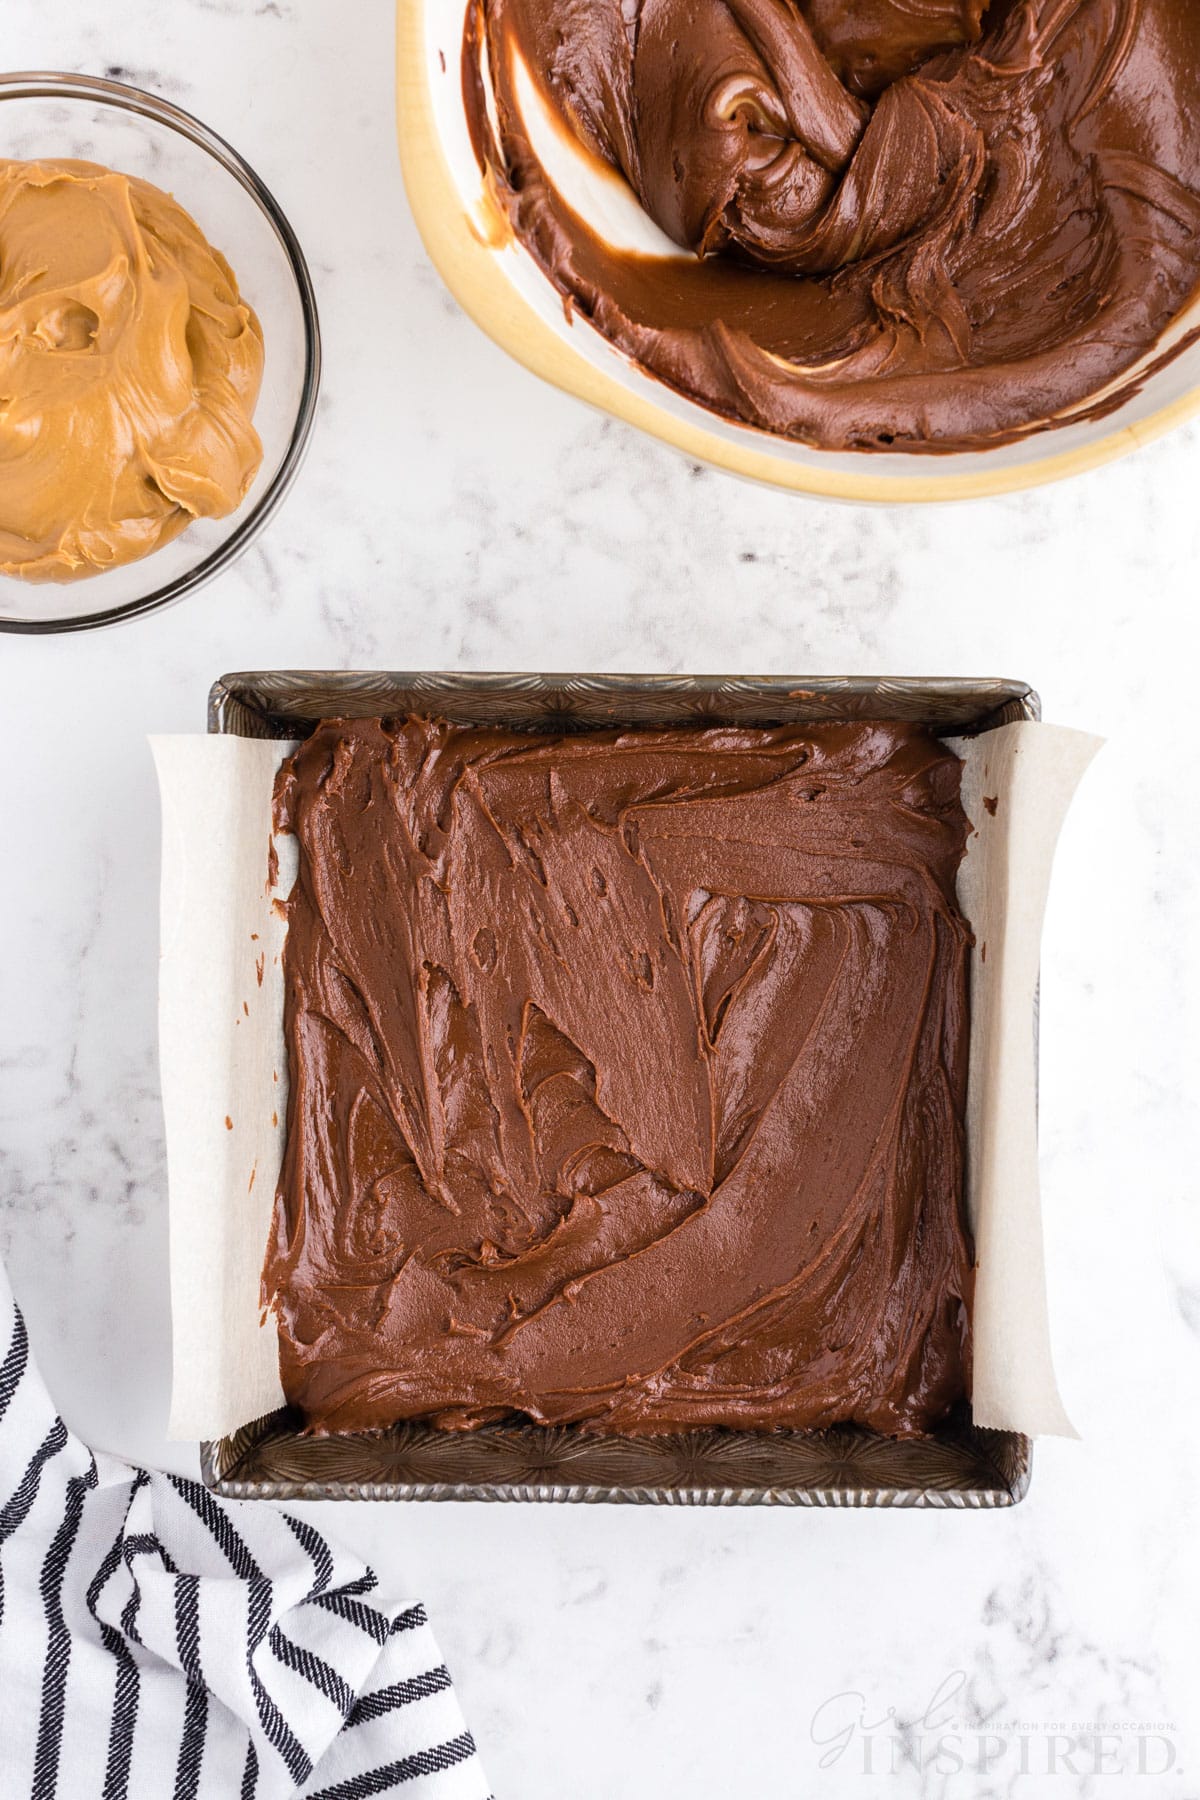 Baking tray lined with parchment paper and filled with some peanut butter and chocolate frosting mixture, glass bowl of remaining peanut butter, mixing bowl with remaining chocolate frosting and peanut butter mixture, striped linen, on a marble countertop.